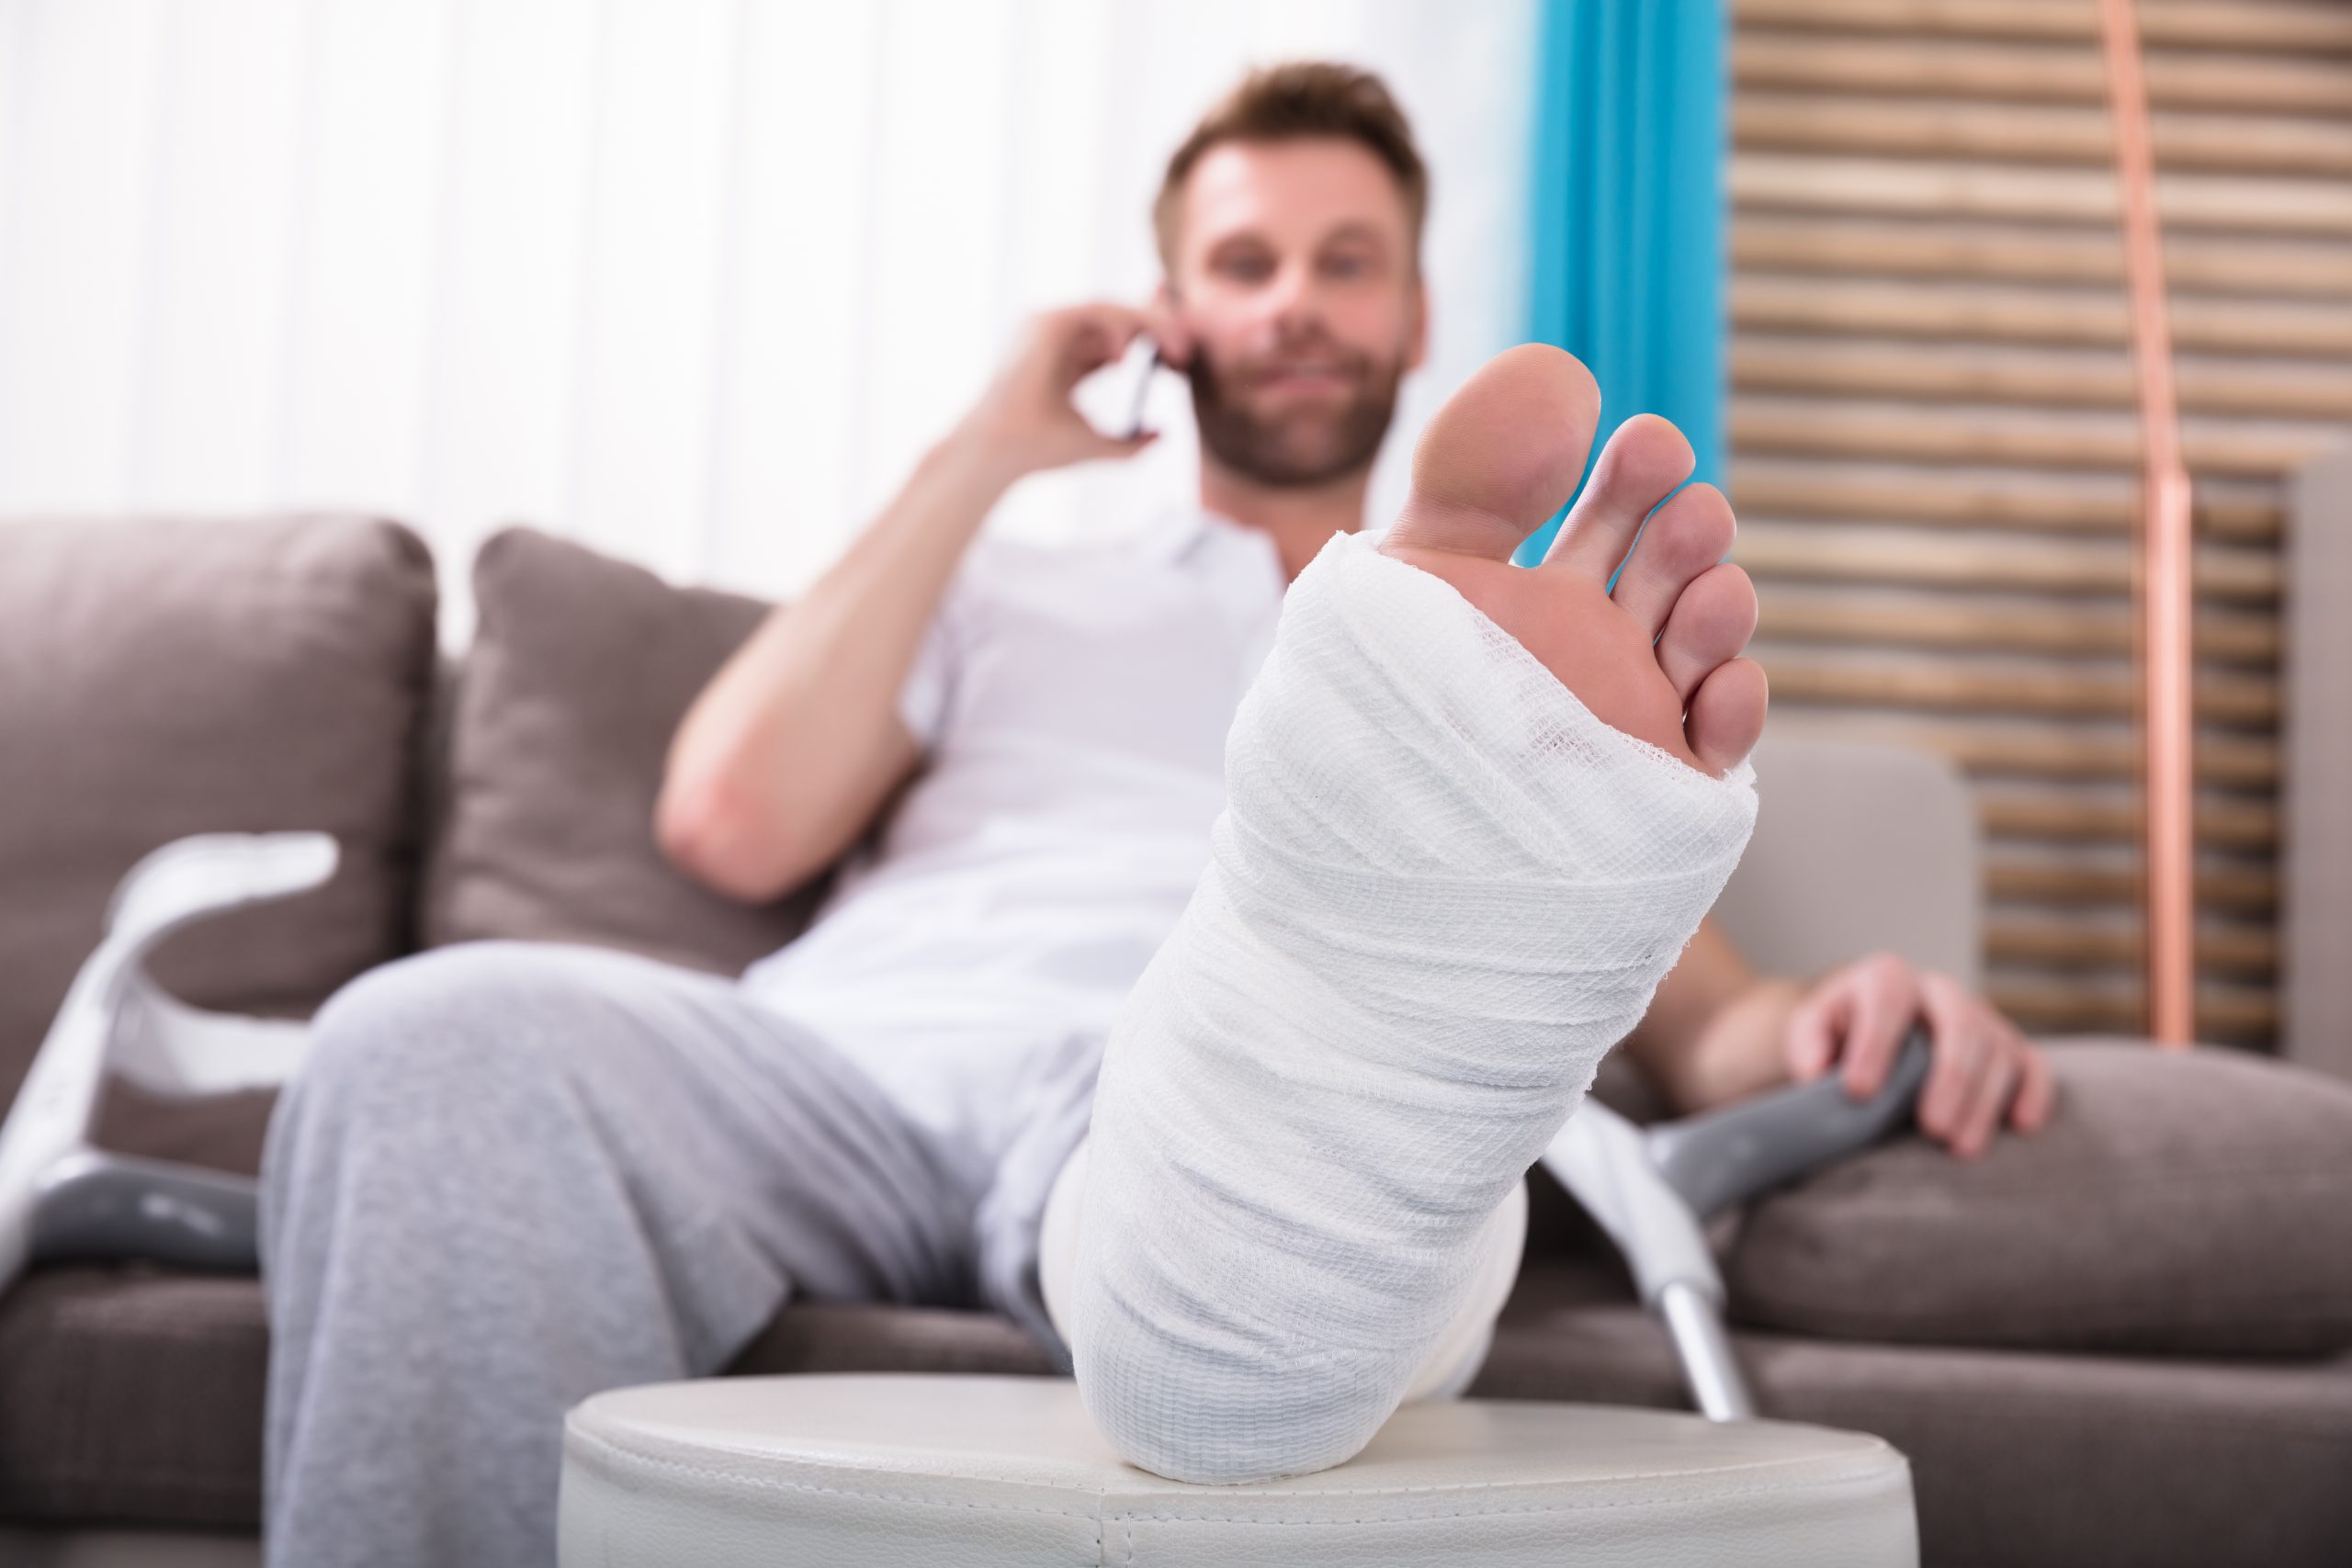 5 sports you can play despite having a broken foot in a cast